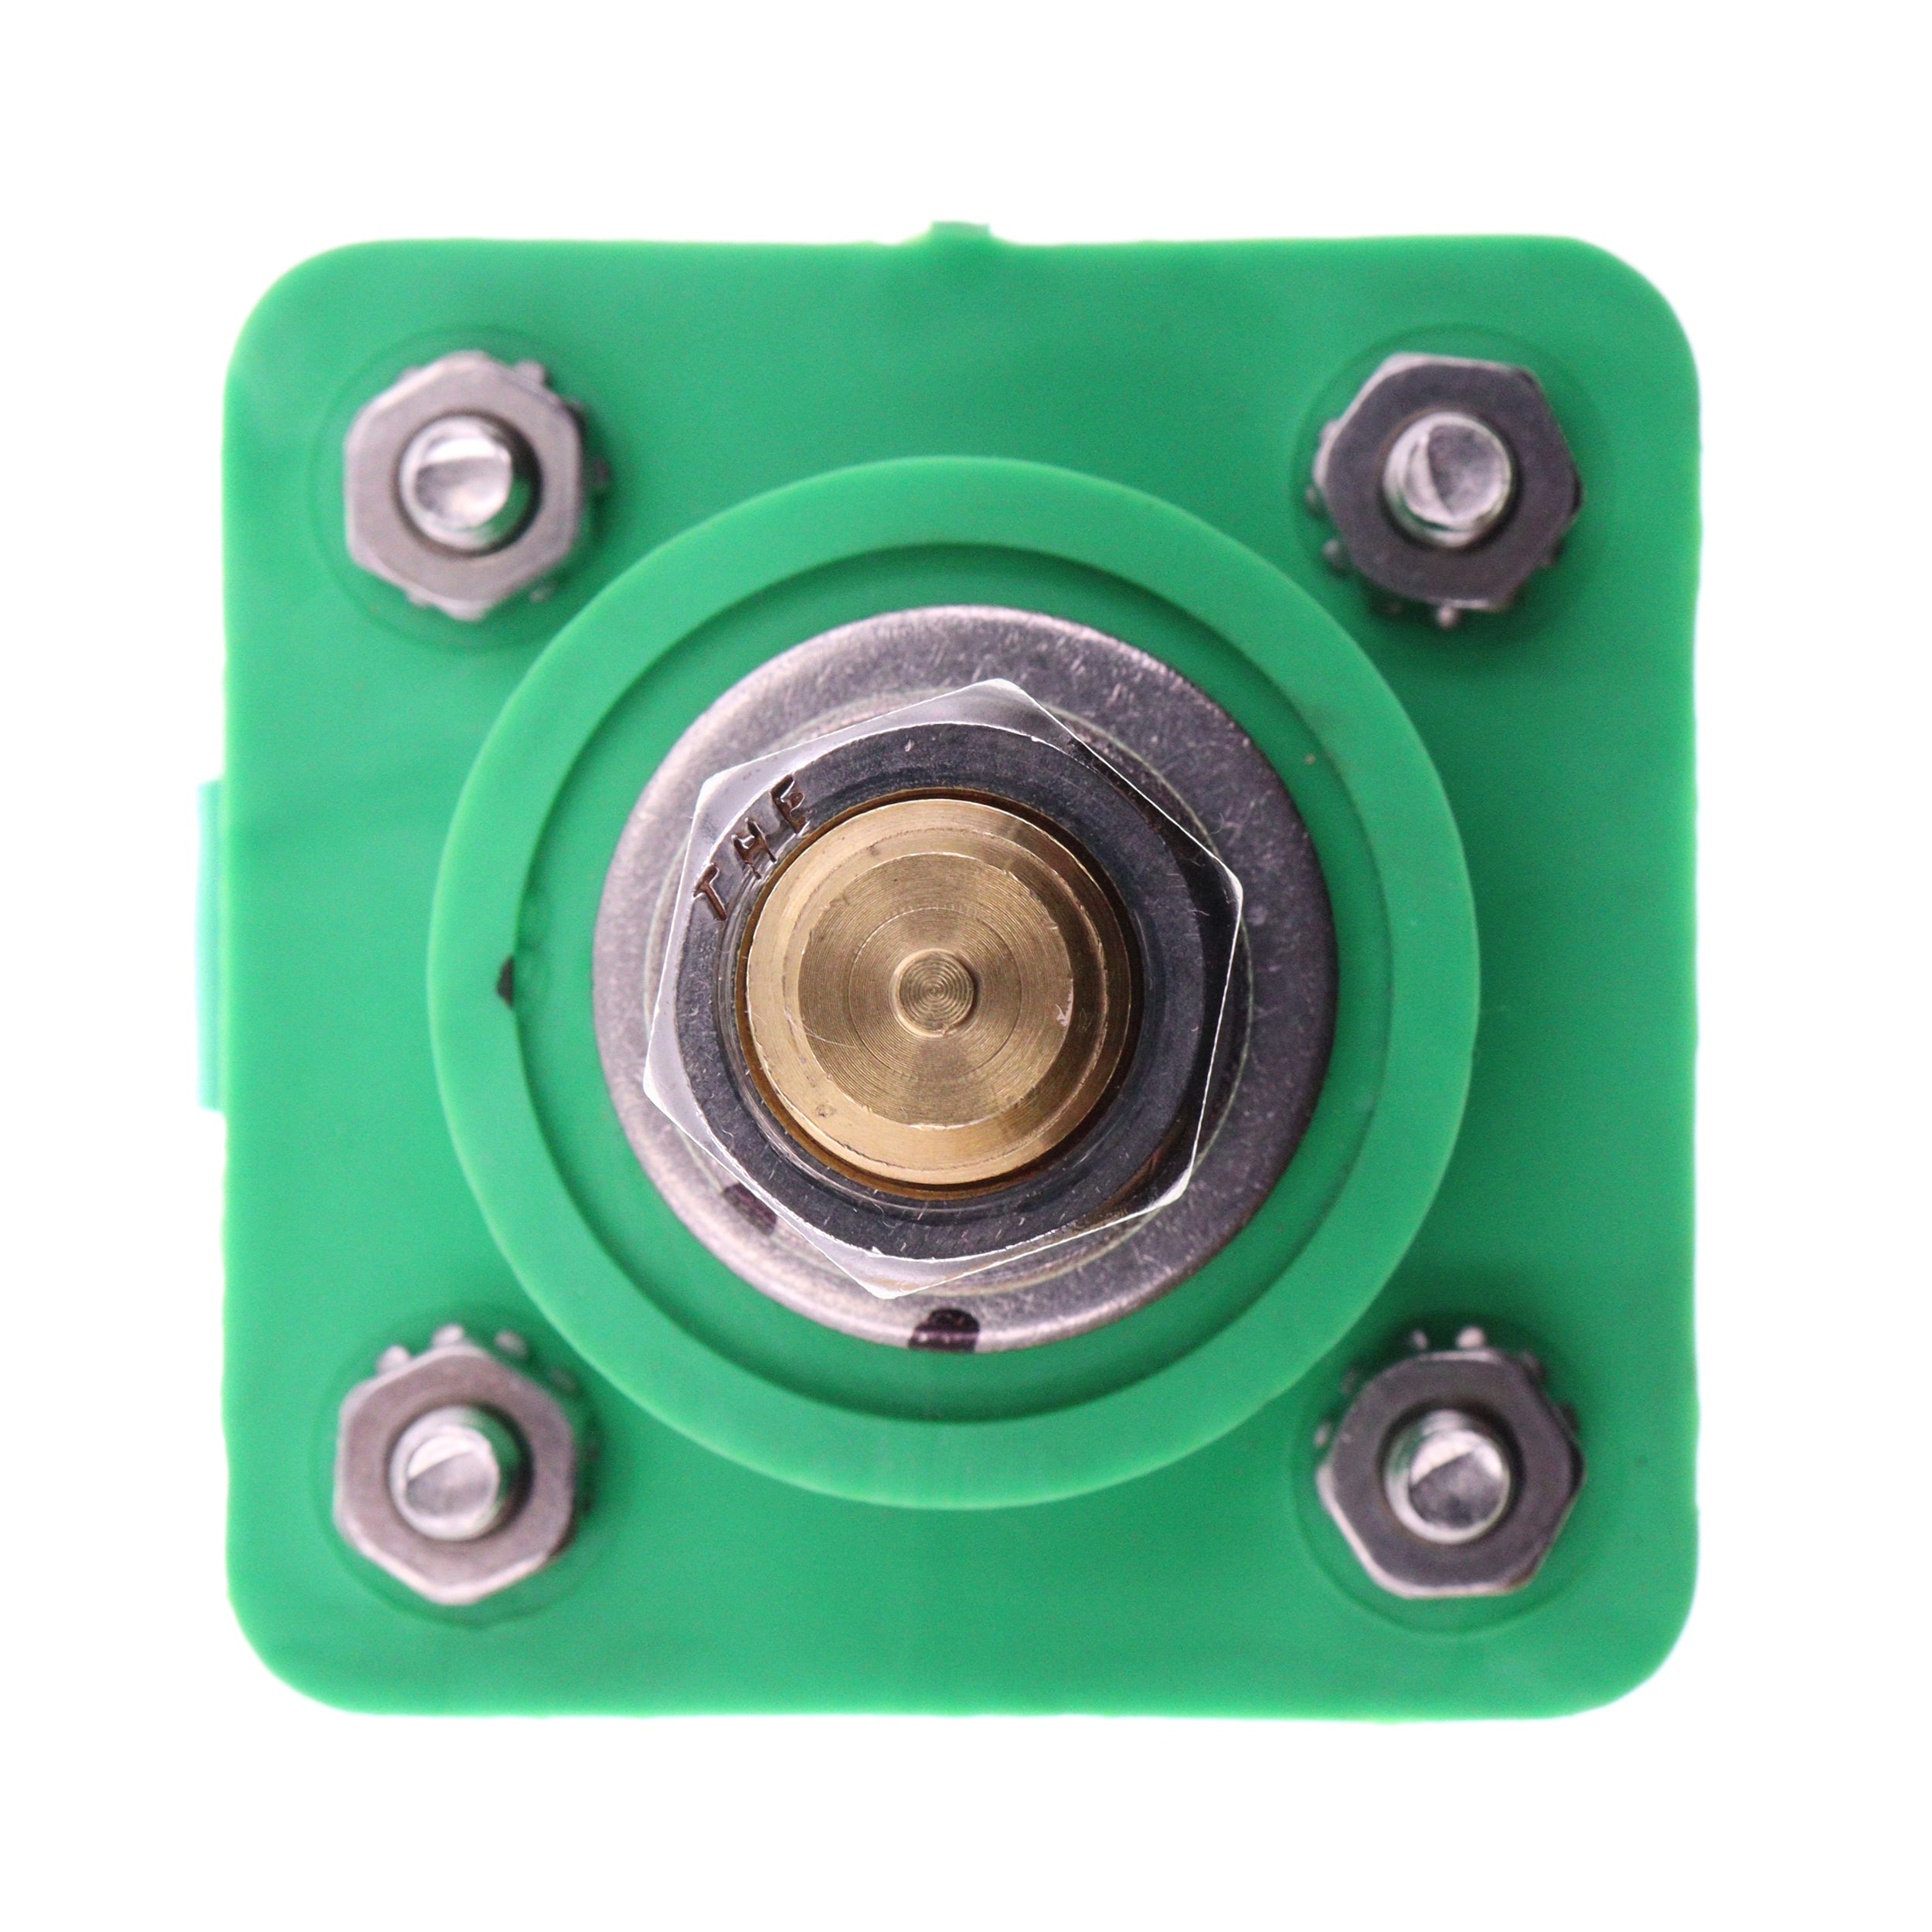 Crouse Hinds, CROUSE-HINDS E1016-1635 + E1016SC-35 J TYPE CAMLOCK FEMALE RECEPTACLE 400A GREEN